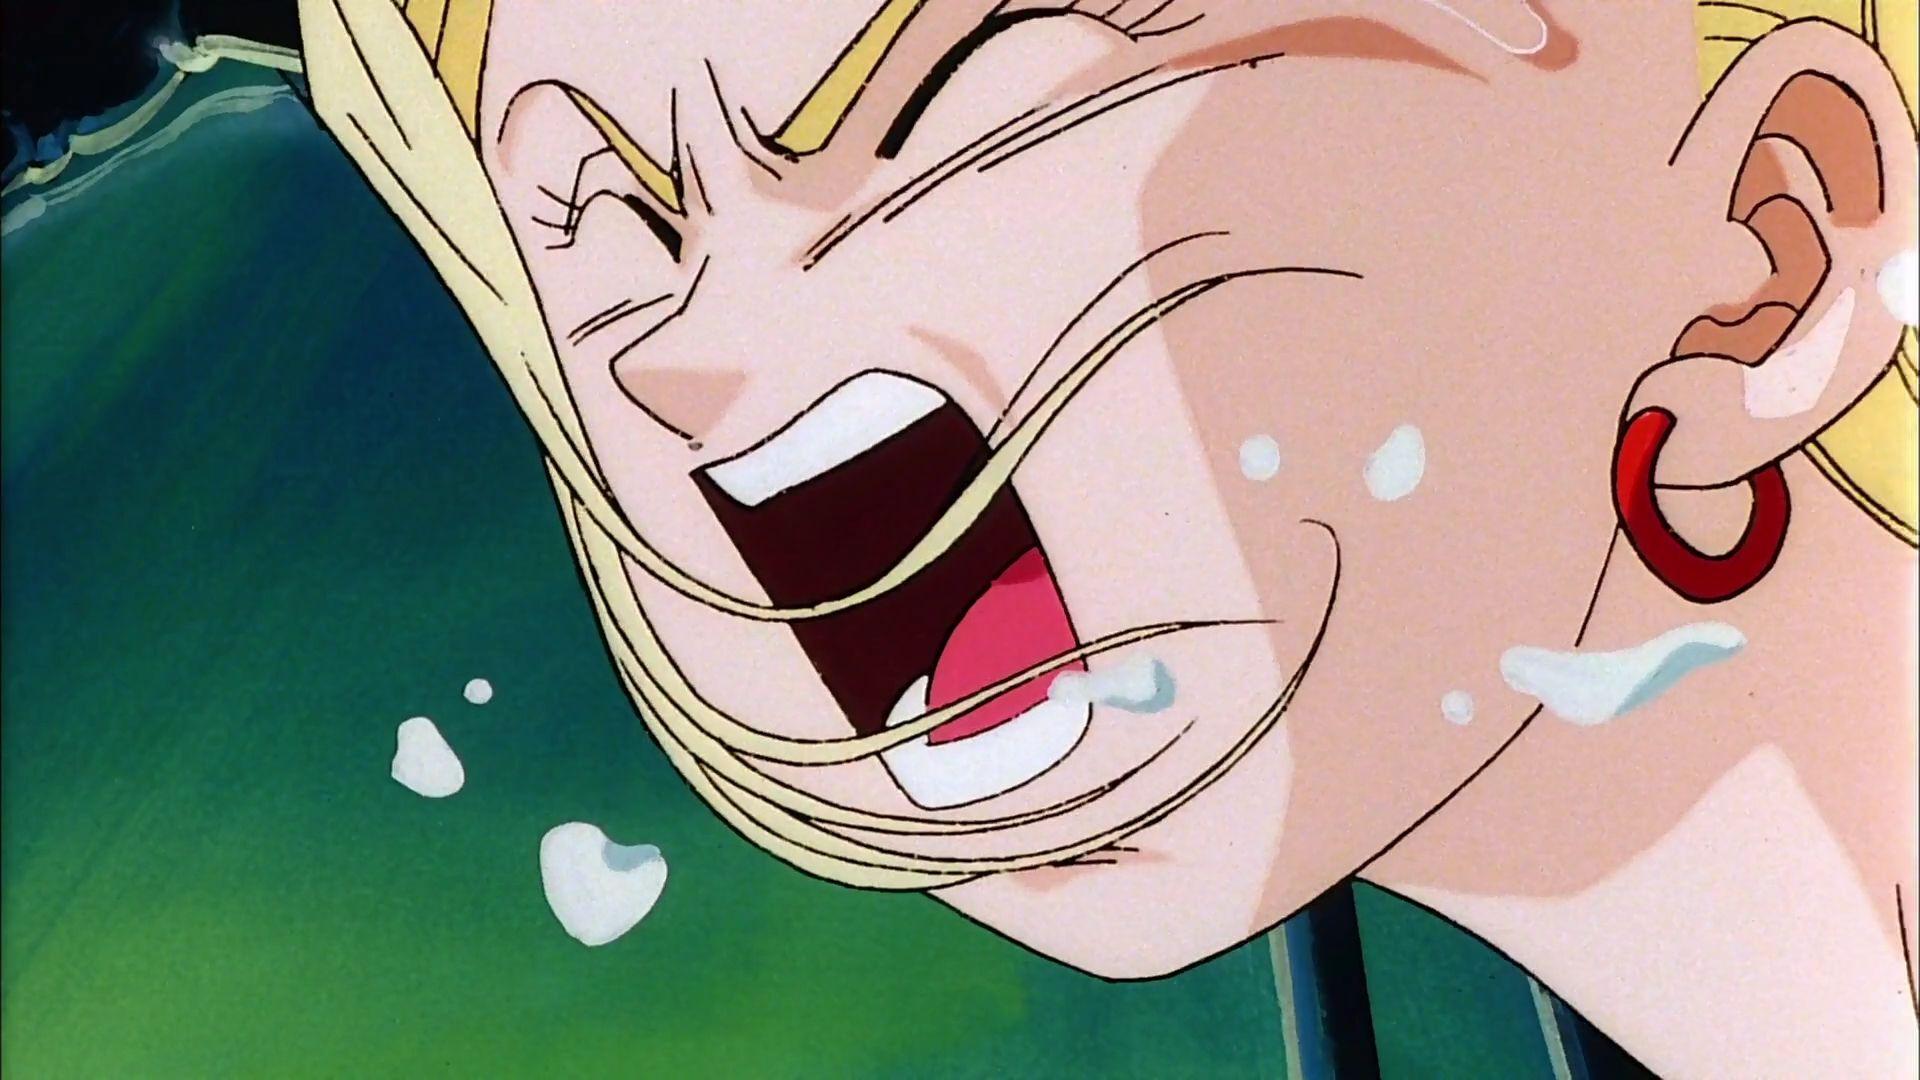 Android 18 punched in the back